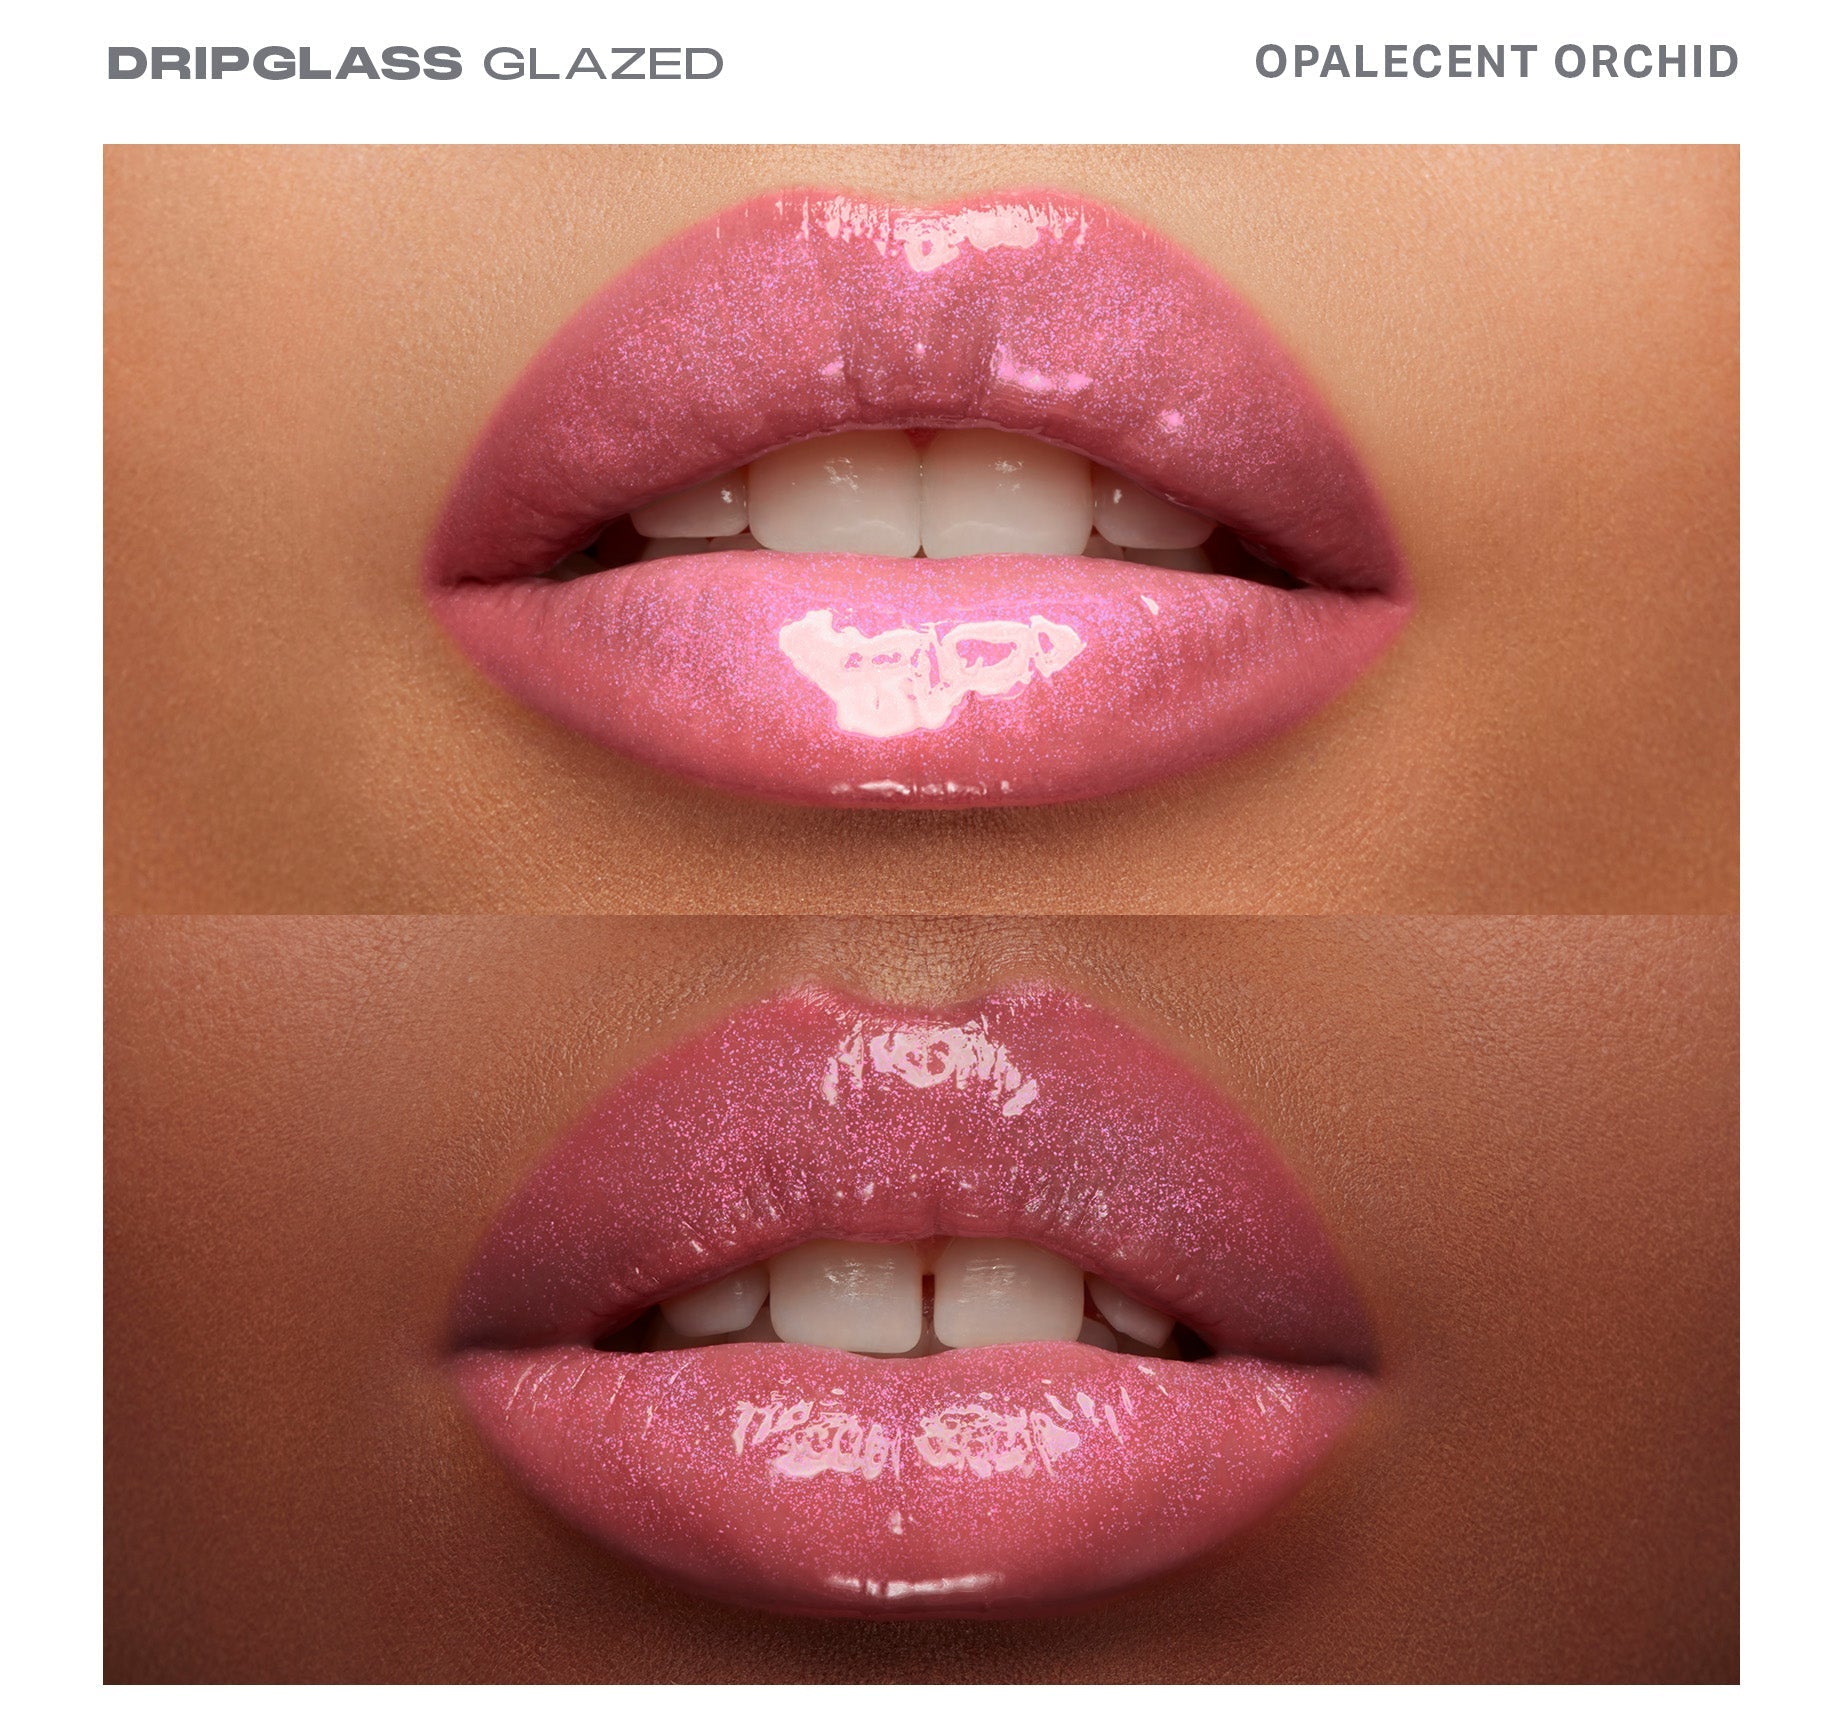 Dripglass Glazed High Shine Lip Gloss - Opalescent Orchid - Image 3